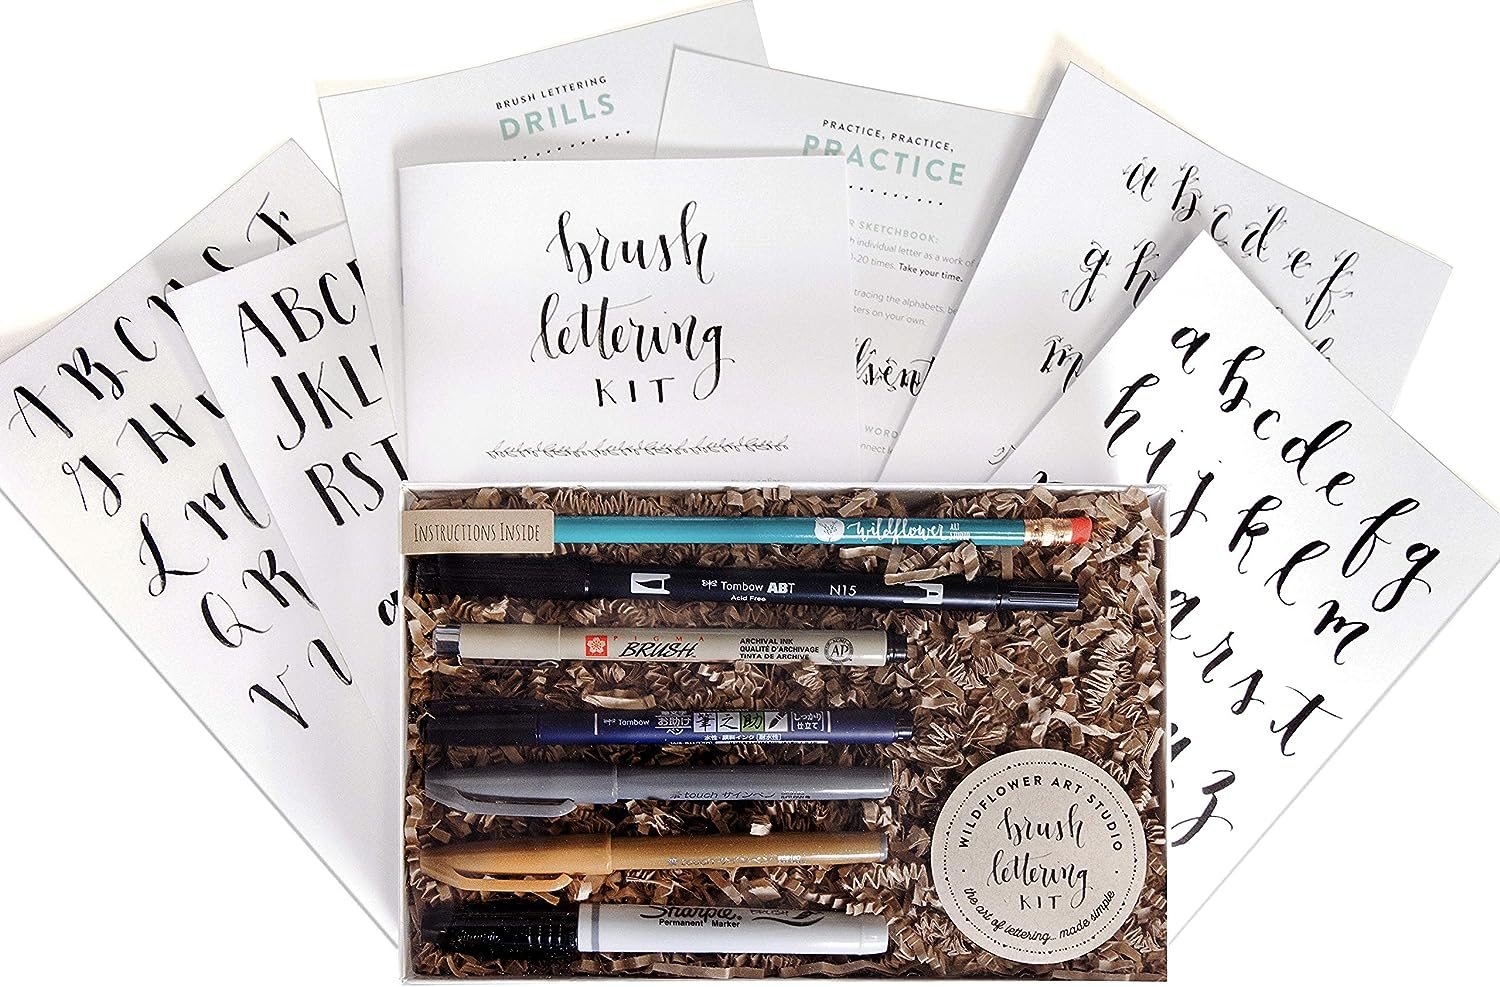 Wildflower Art Studio Brush Lettering Calligraphy Kit • Award-Winning Starter Set for Beginners • Includes Instruction Book, Tracing Pad & Supplies • Gift Set - Kids, Teens, Adults